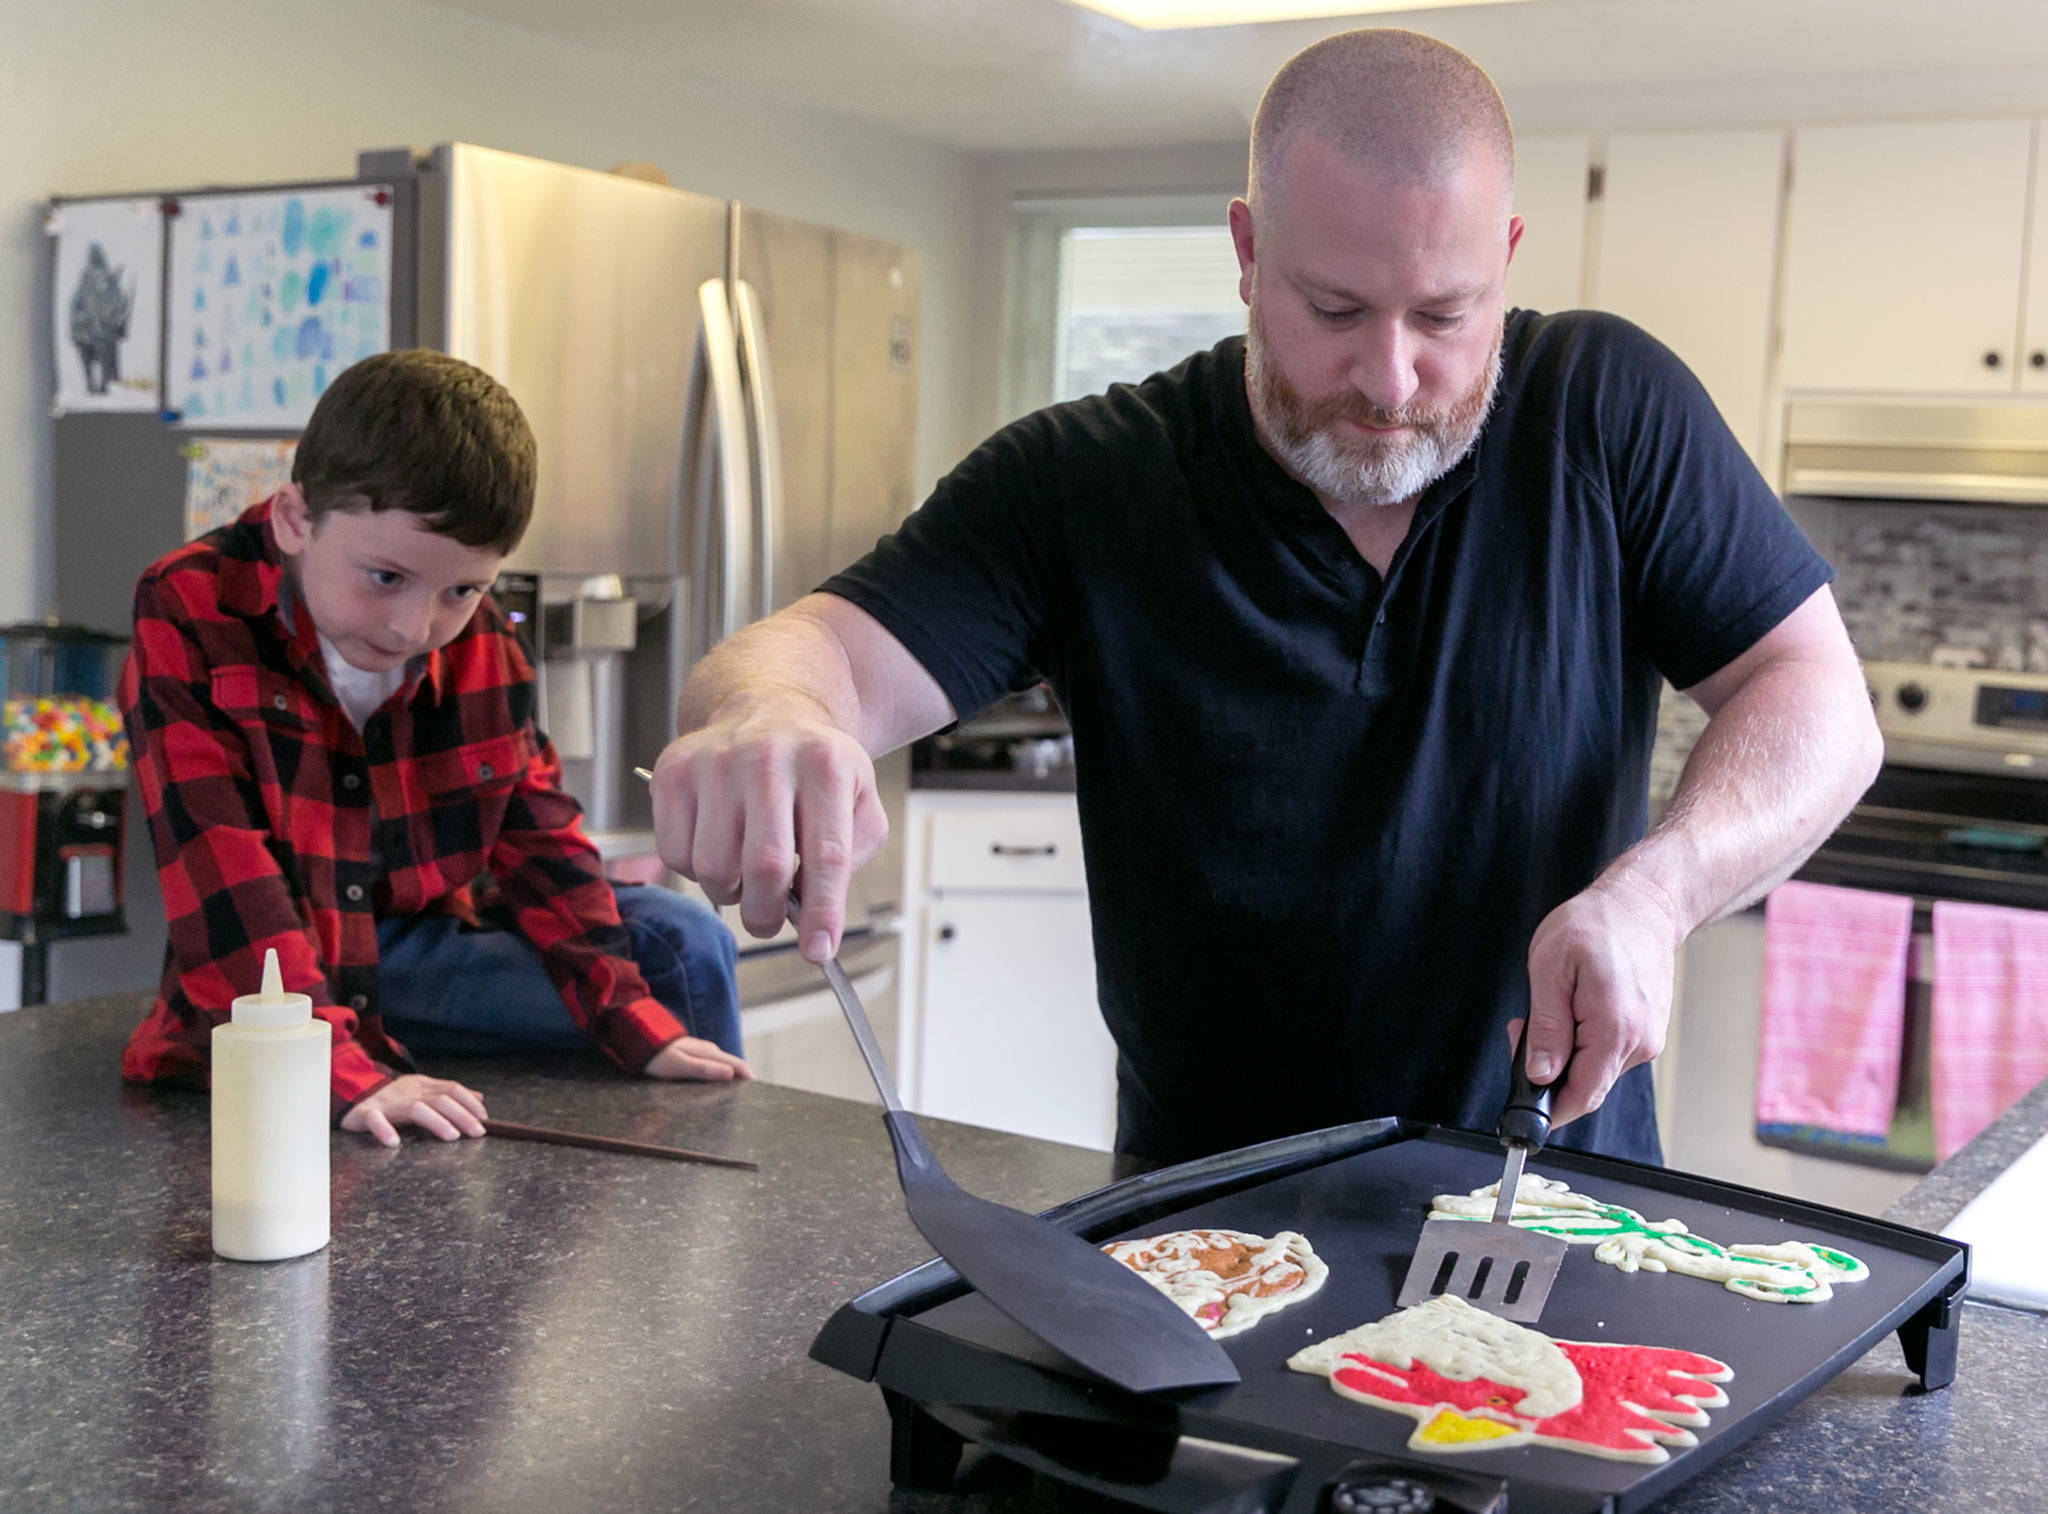 Pancake artist Brek Nebel makes pancakes under the watch of his son Koen, 7, at their home in Snohomish. (Kevin Clark / The Herald)